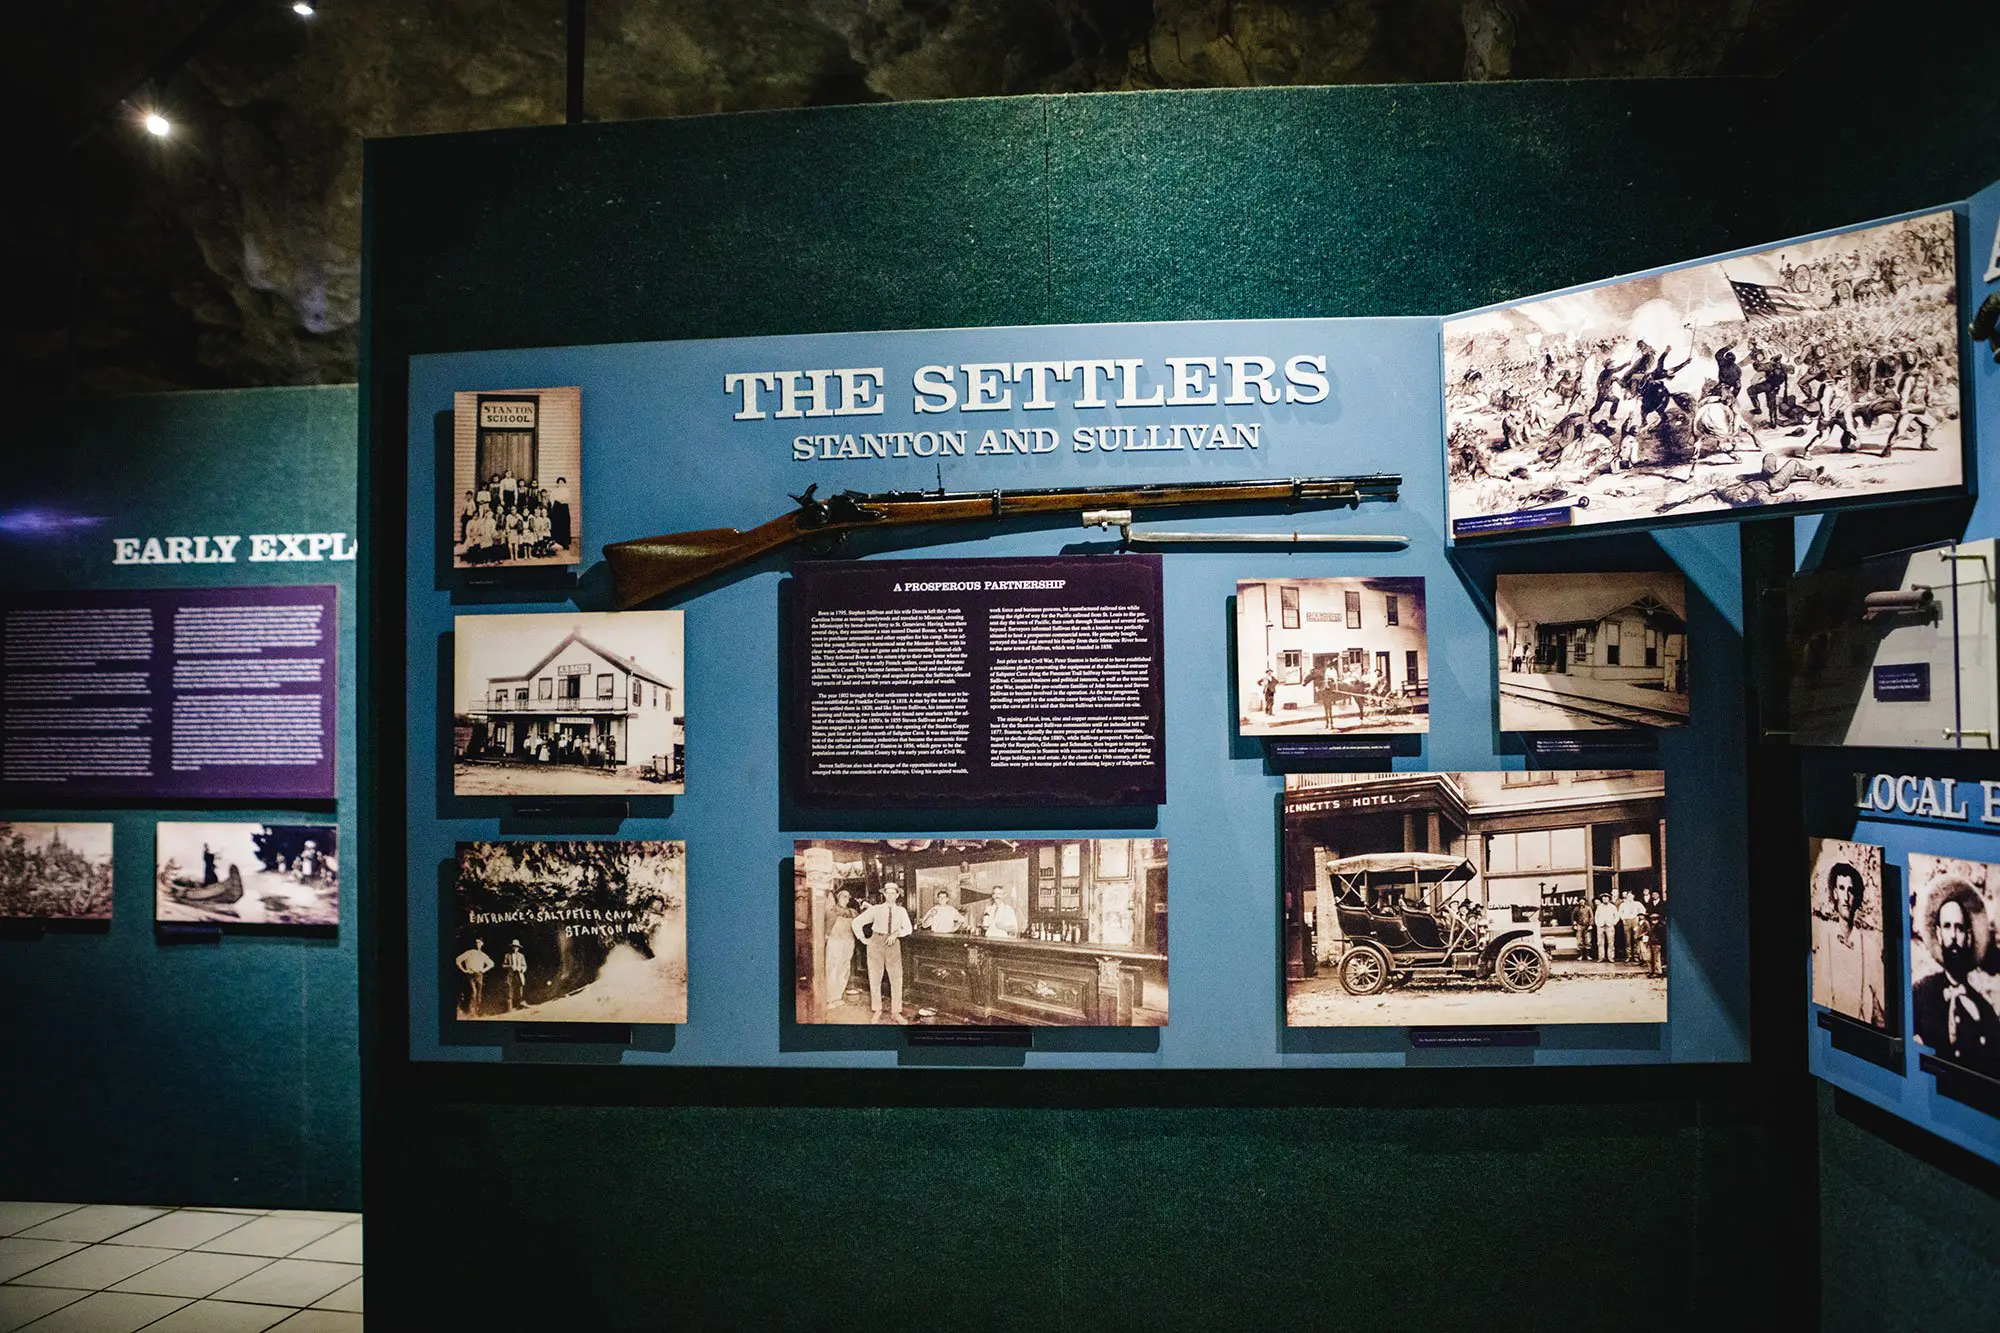 Close up photo of The Settlers board inside of the Meramec Caverns museum